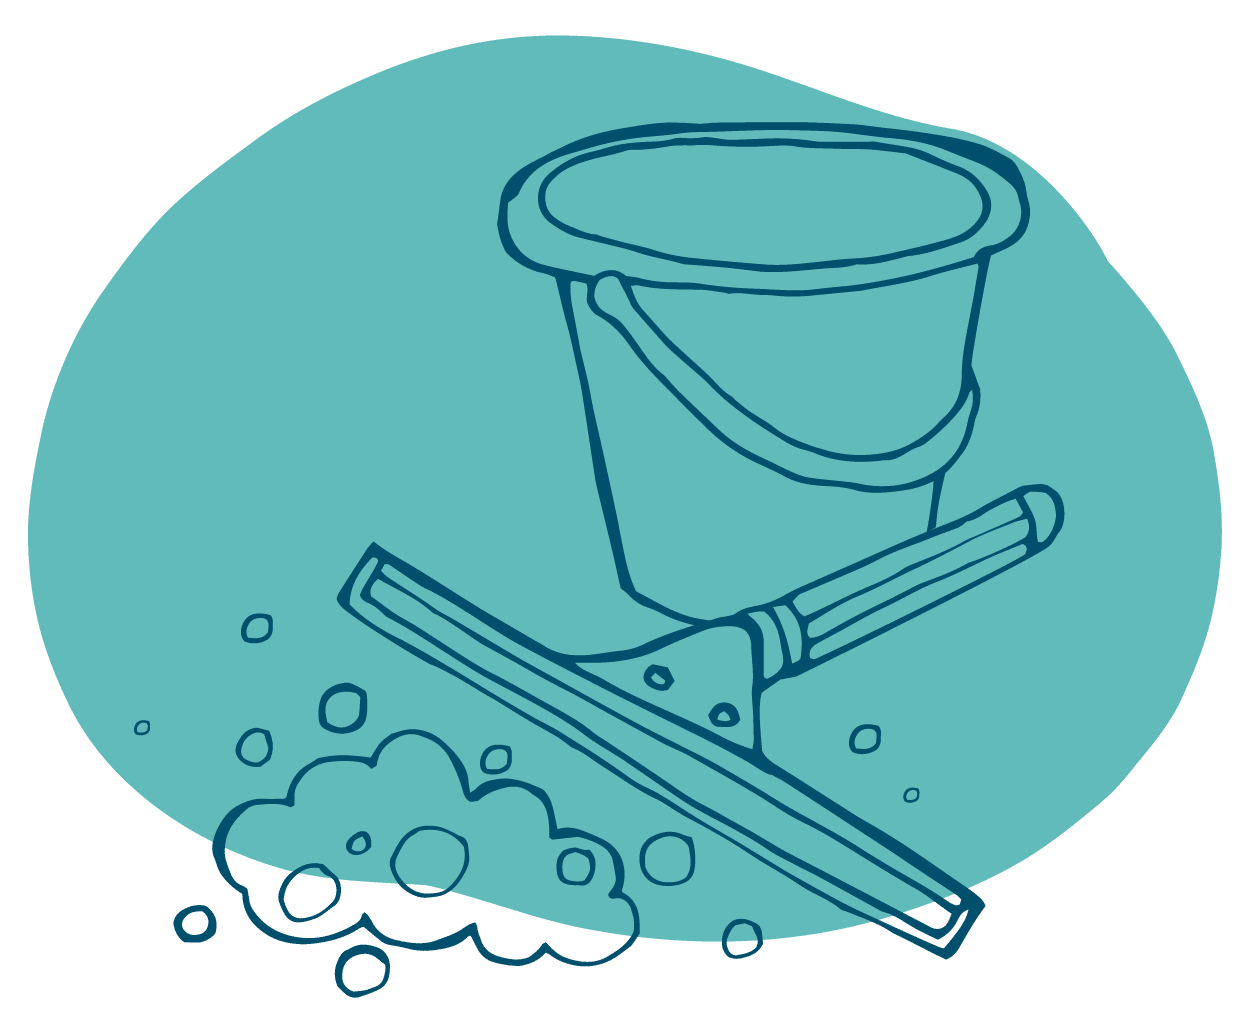 cleaning services icon